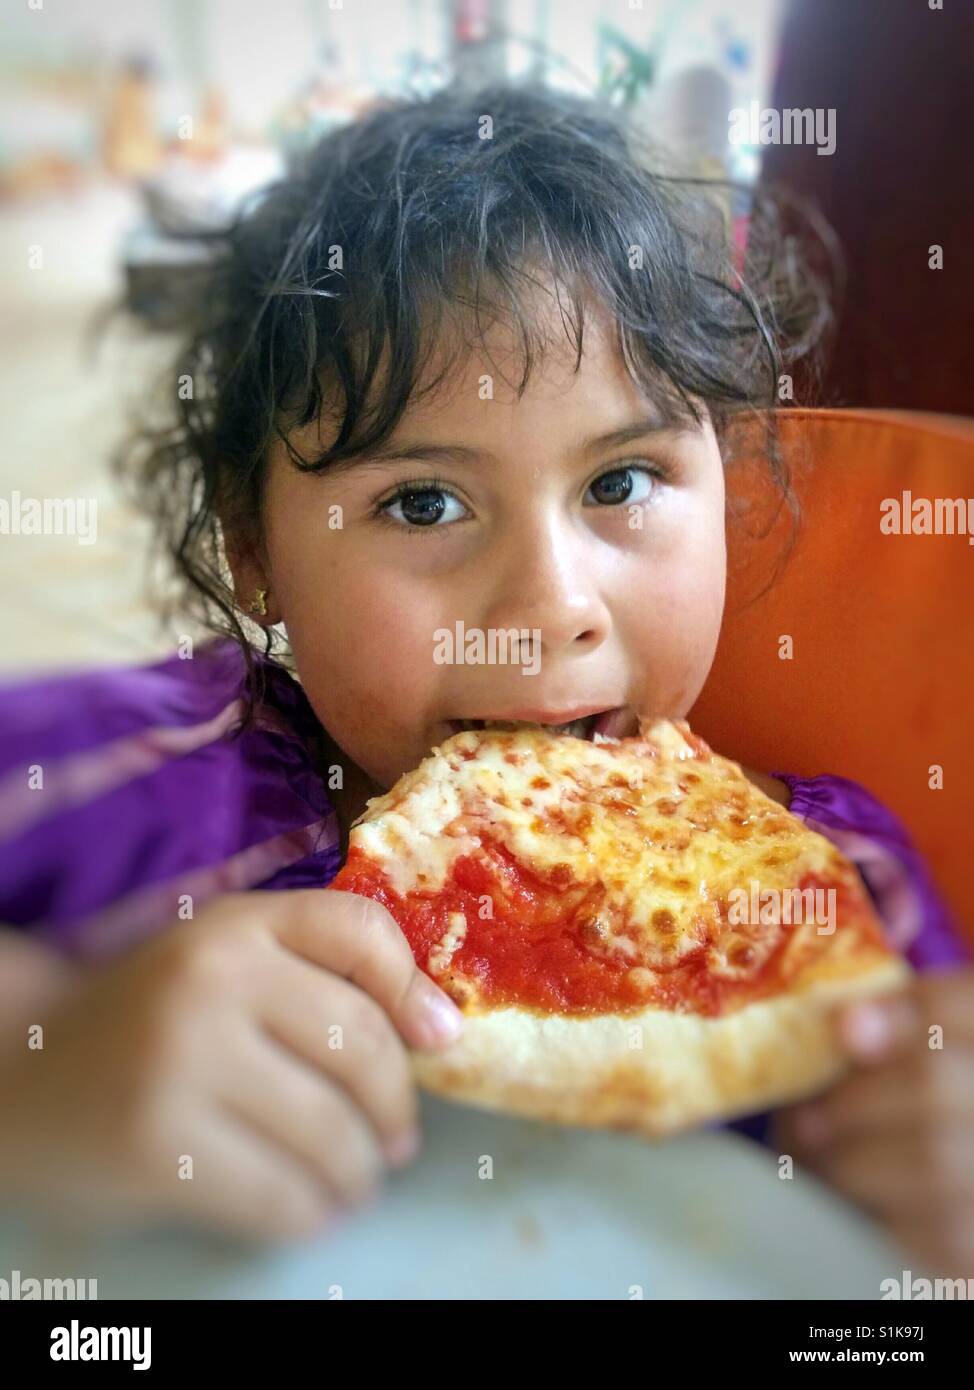 Little girl eating a pizza. Stock Photo